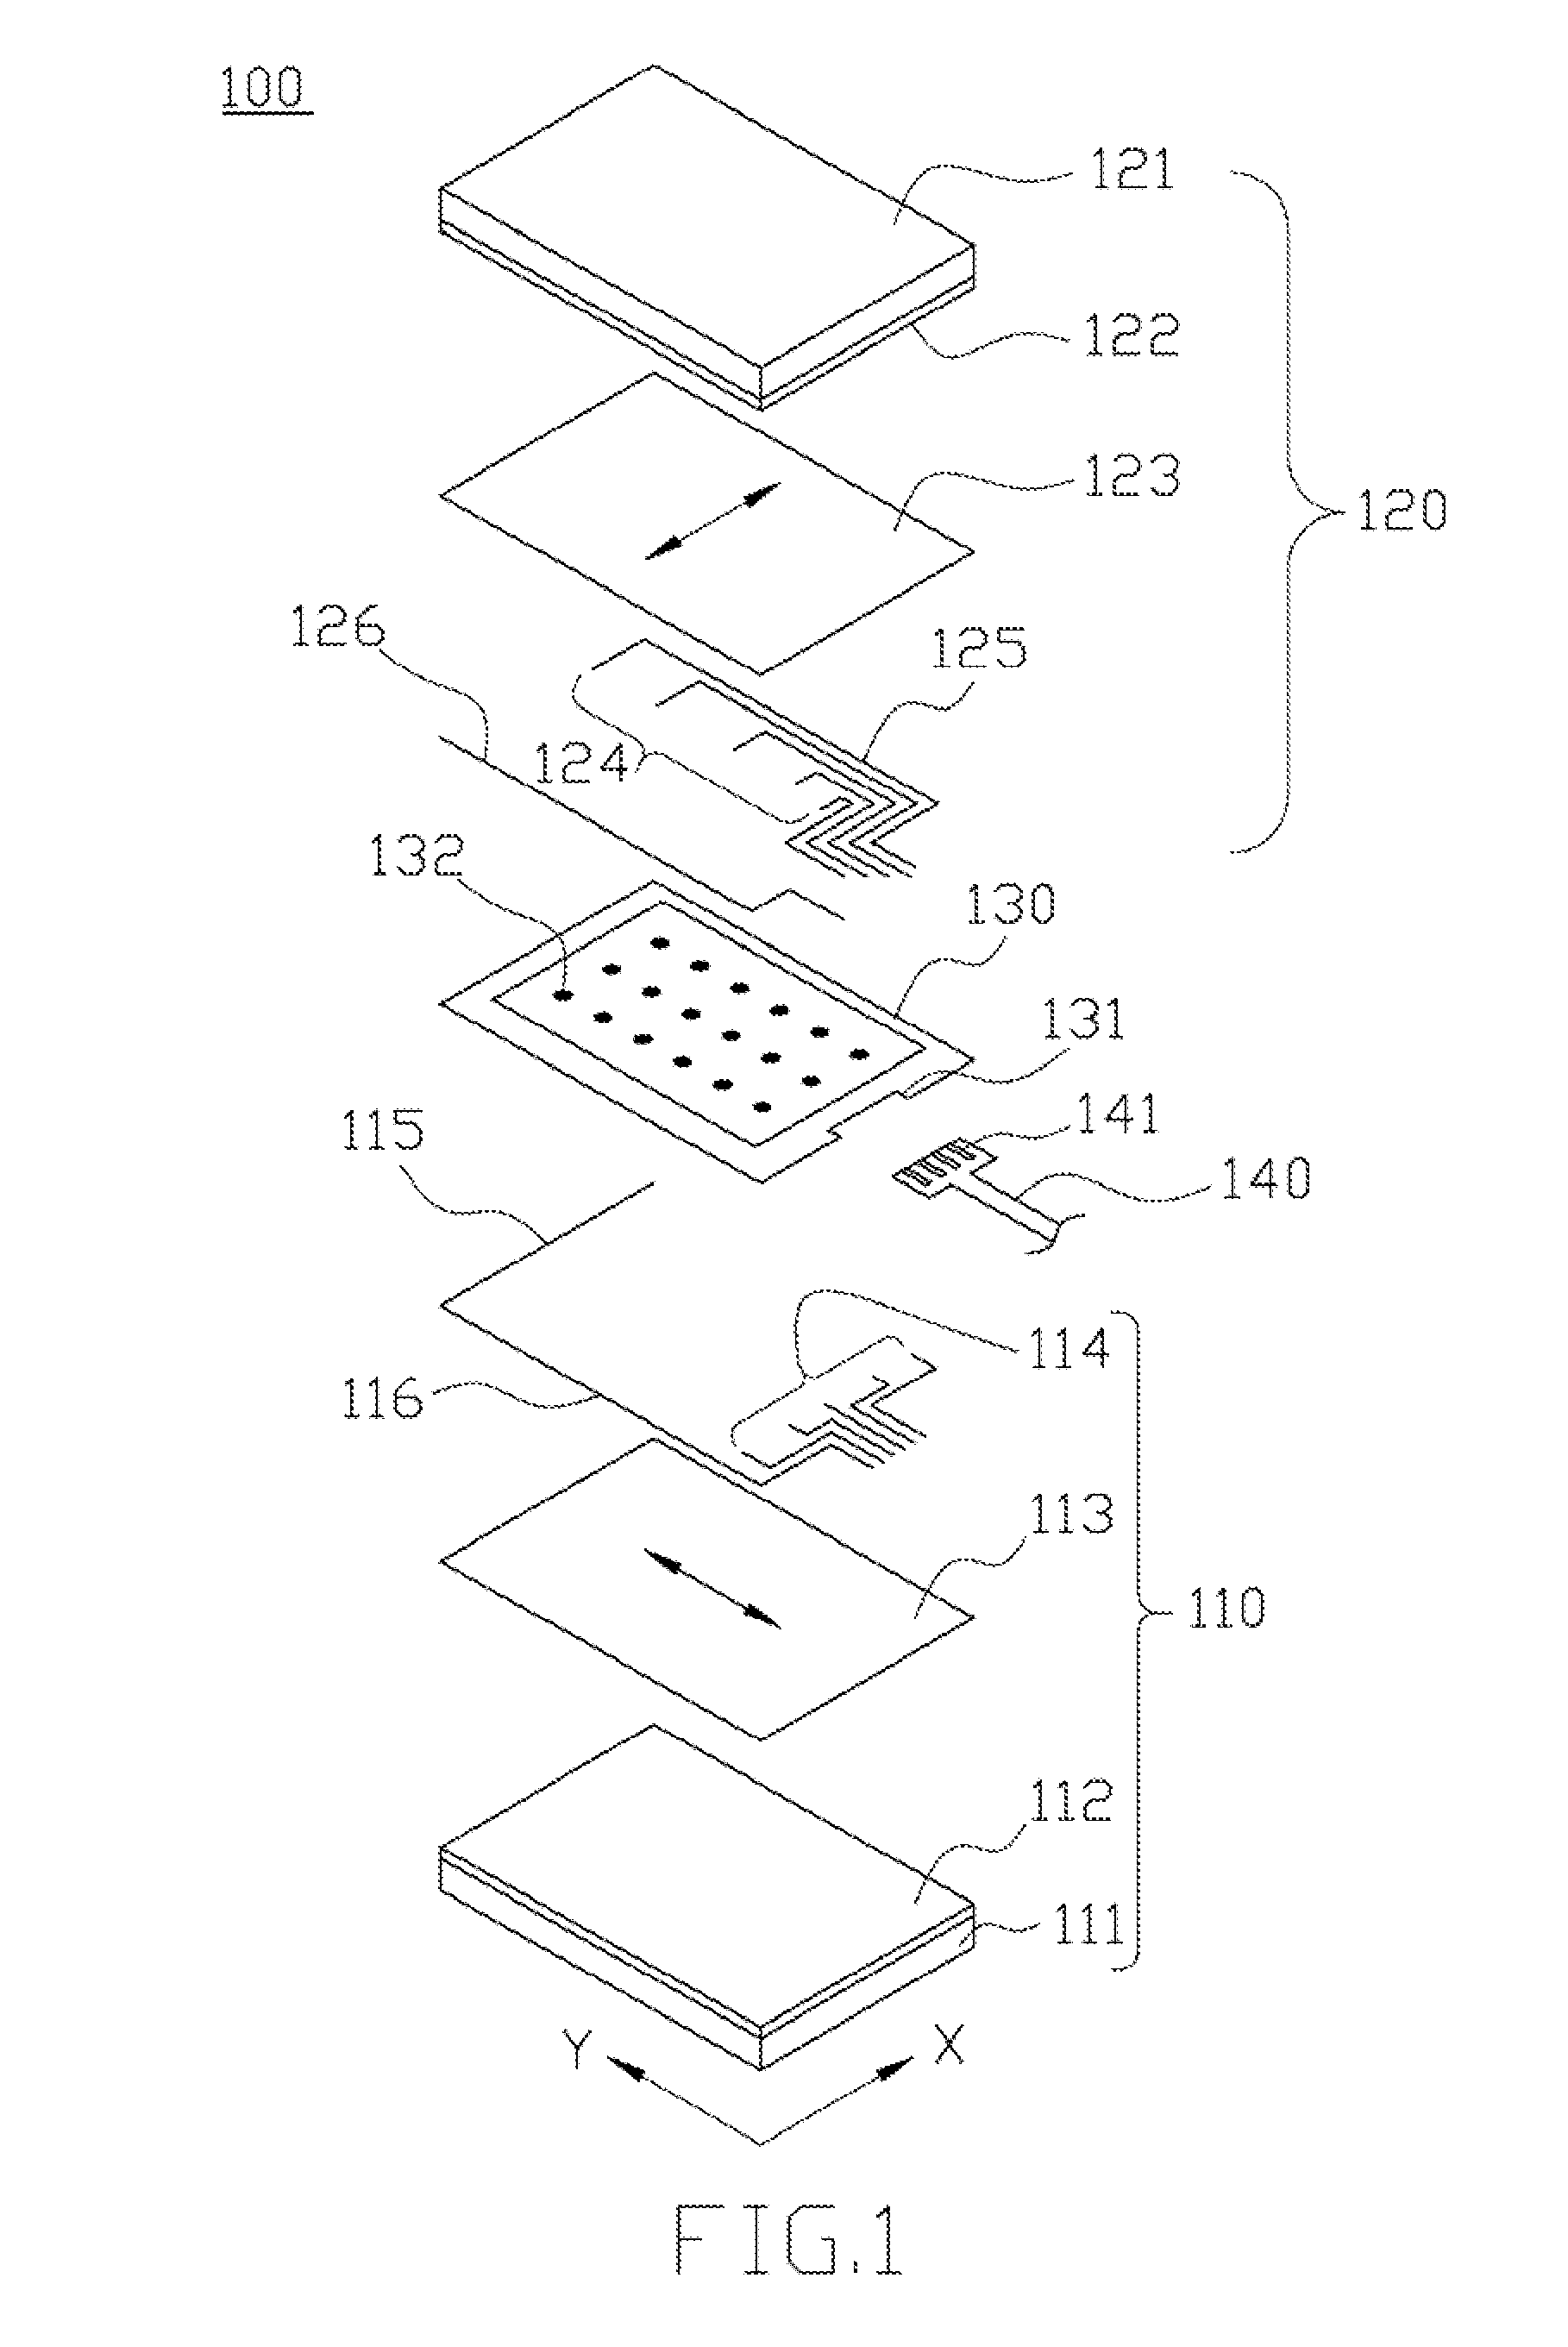 Multi-touch detecting method for detecting locations of touched points on a touch panel